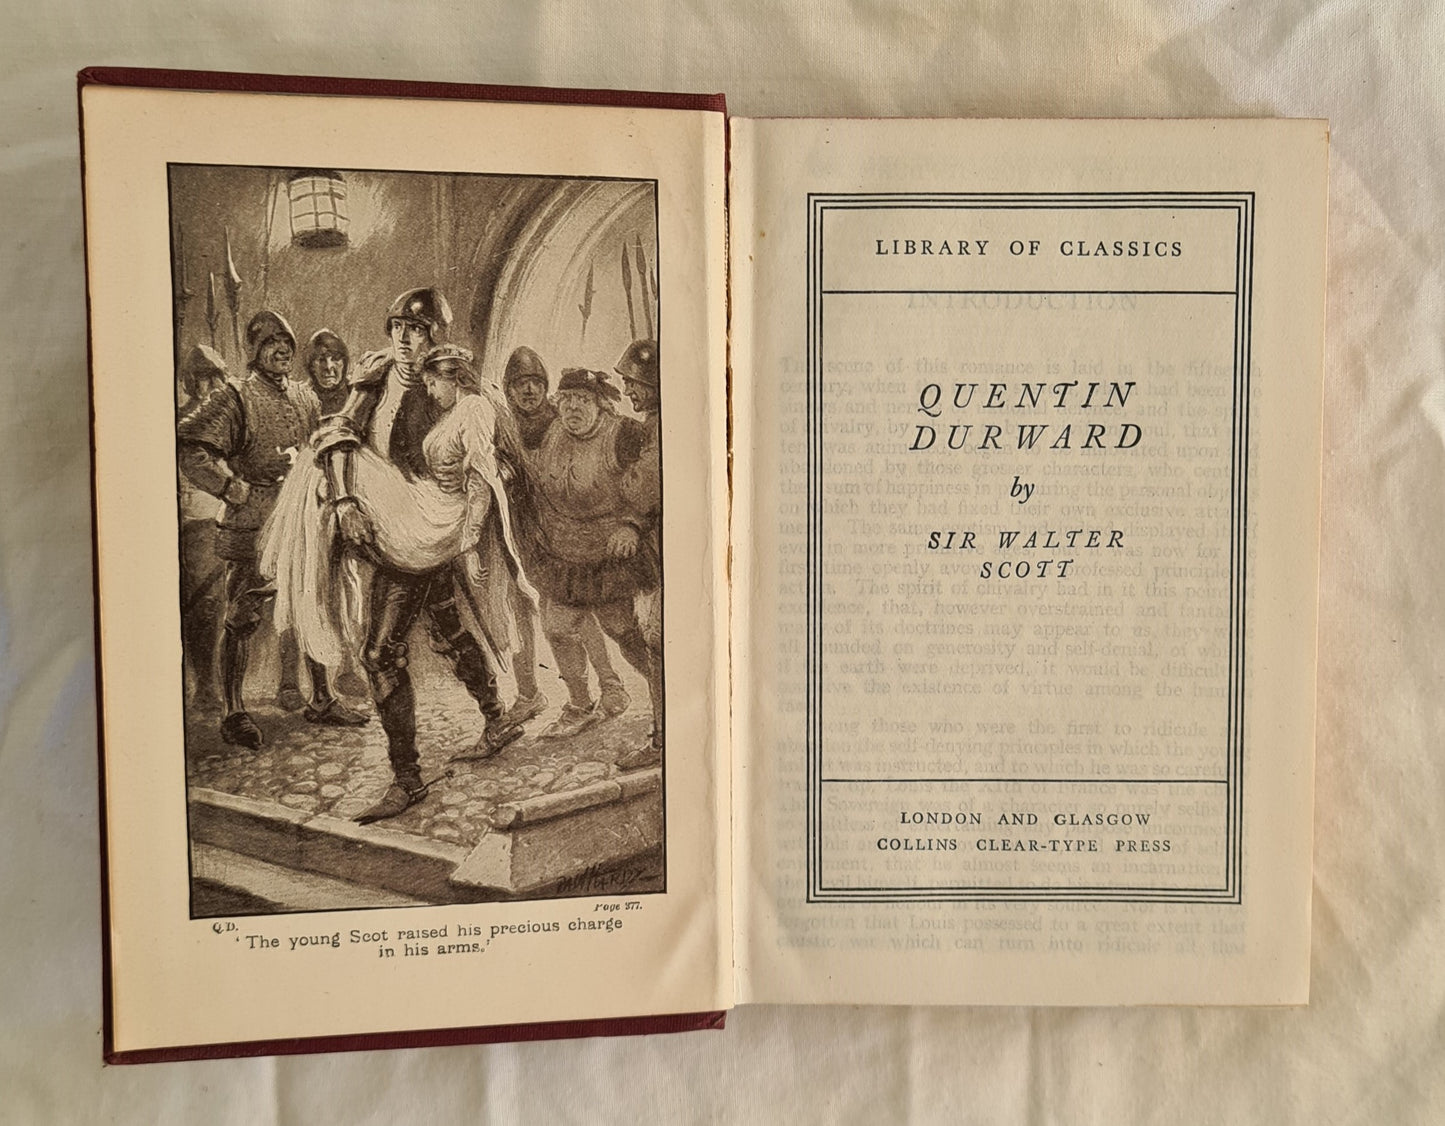 Quentin Durward  by Sir Walter Scott  Library of Classics